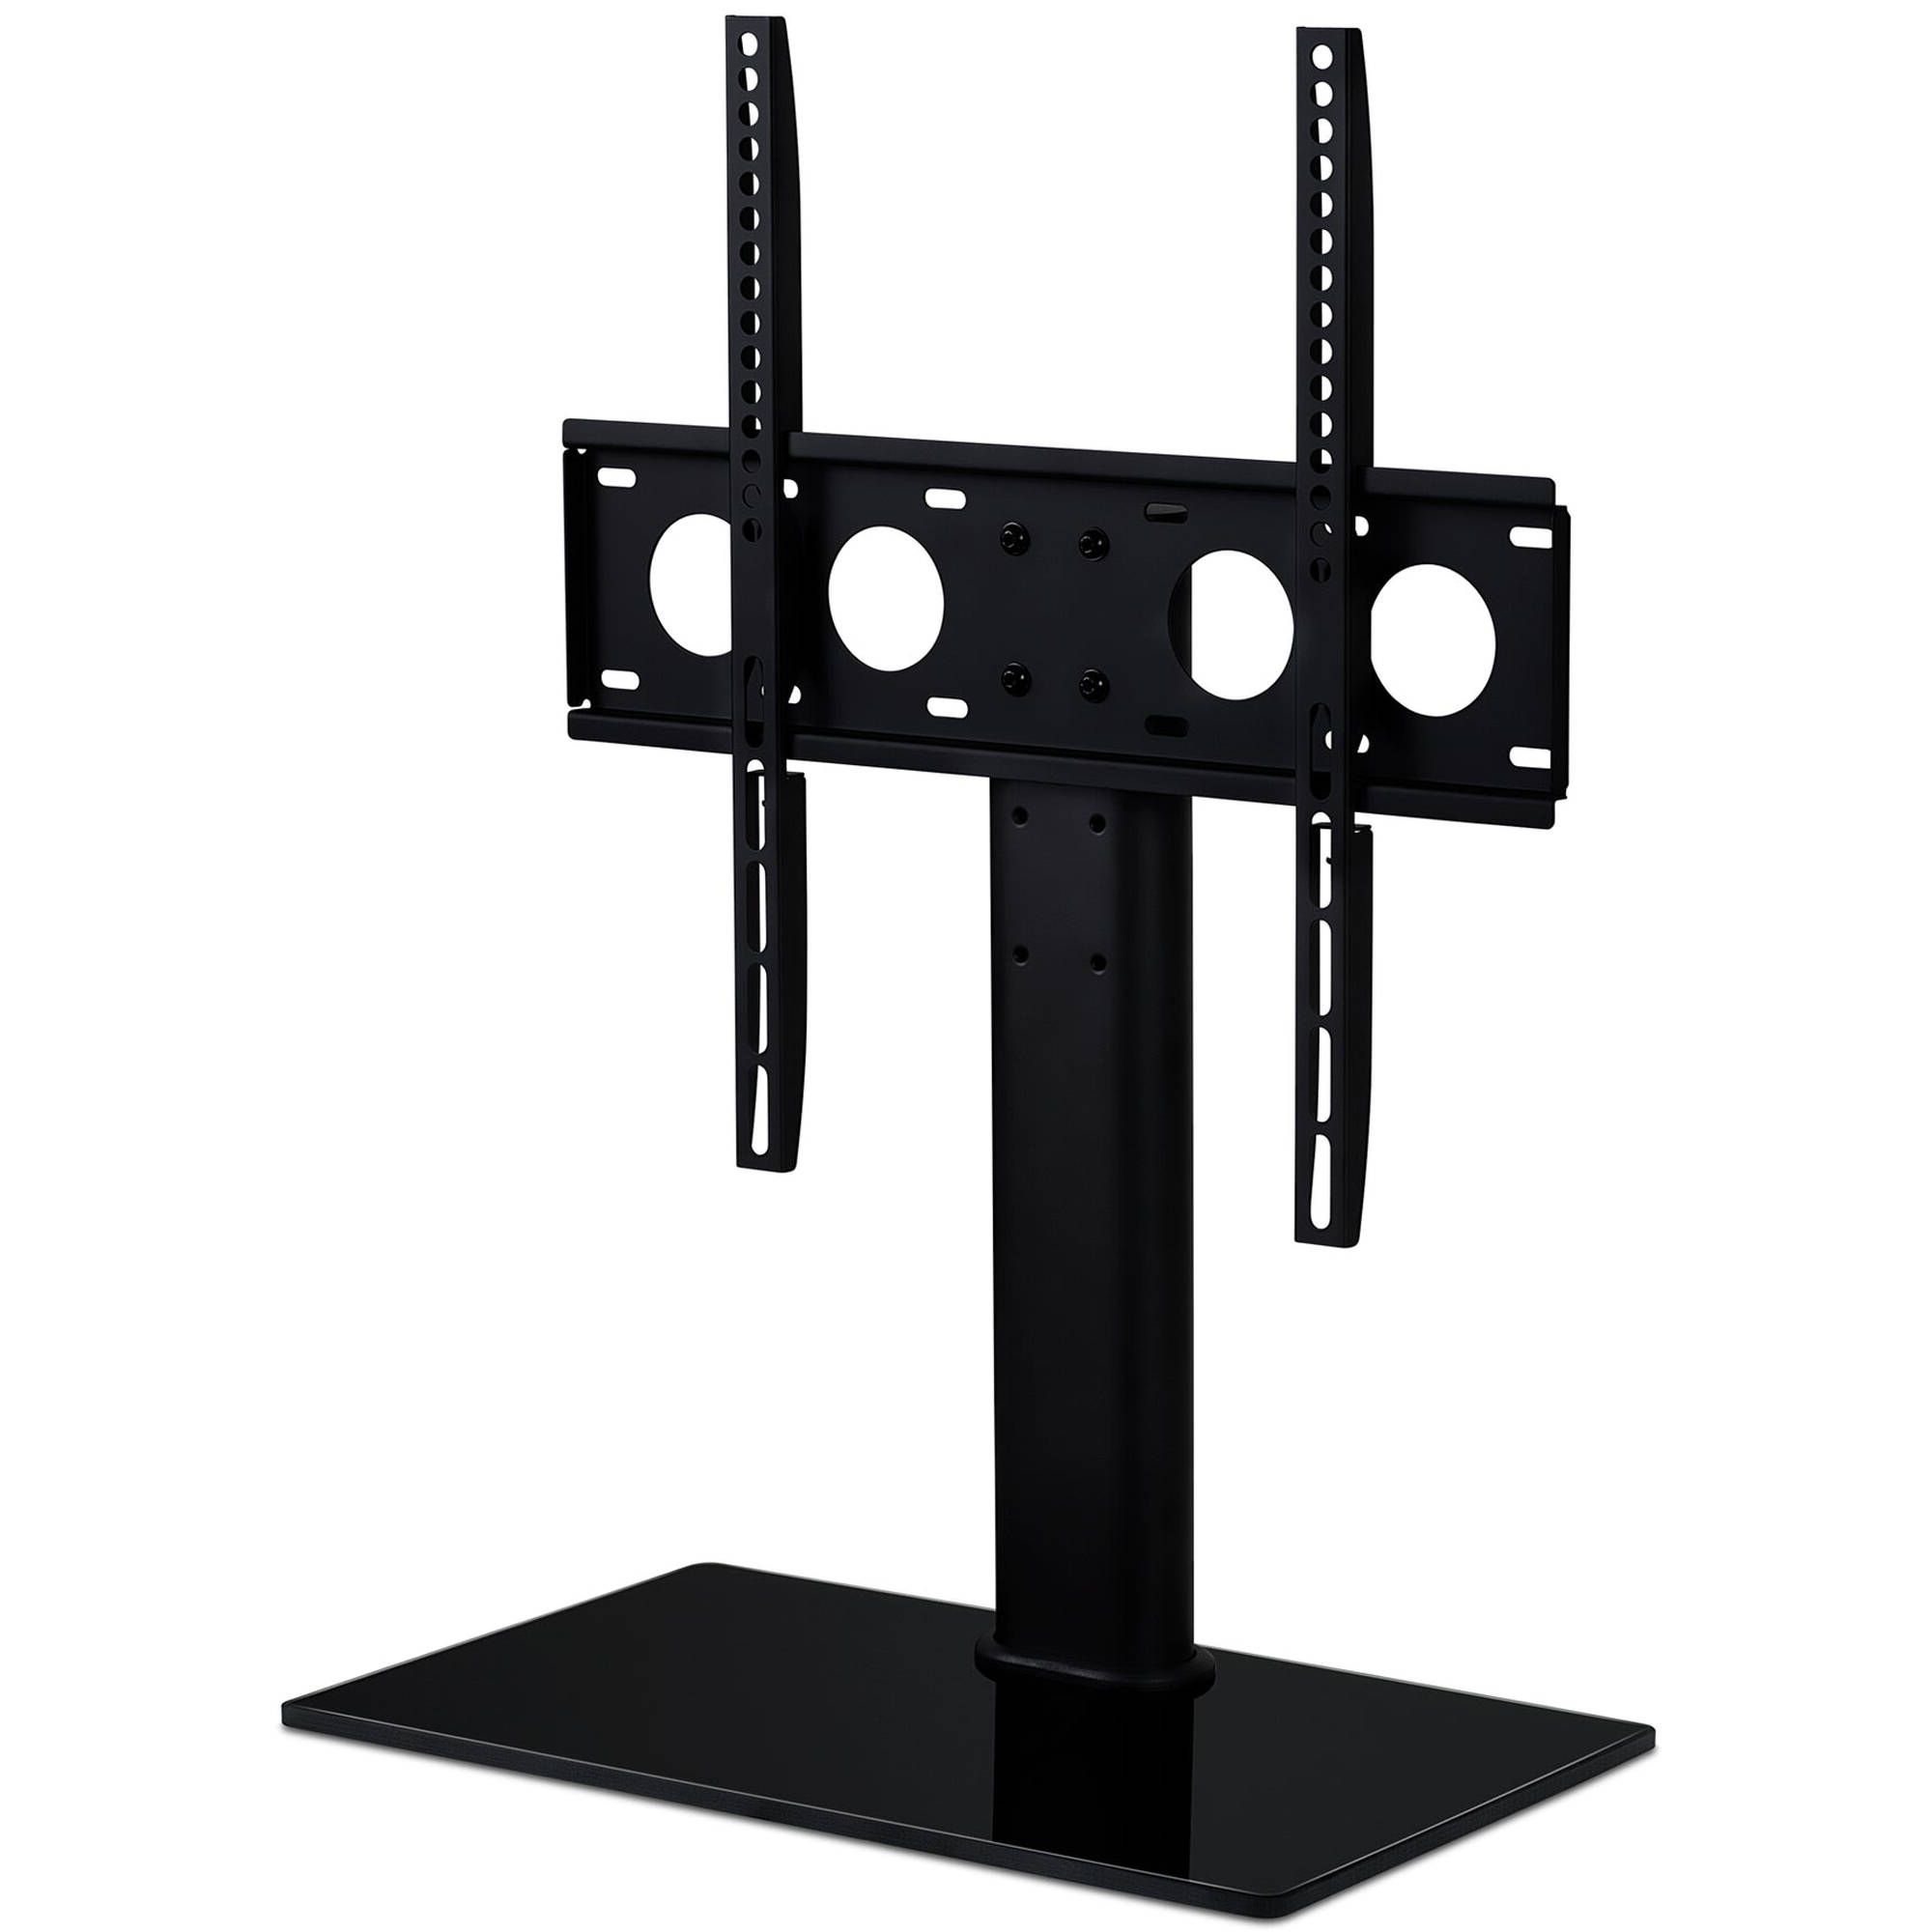 Mount It! Universal Tabletop Tv Stand Mi 847 B&h Photo Video Throughout Universal Tabletop Tv Stands (Gallery 15 of 20)